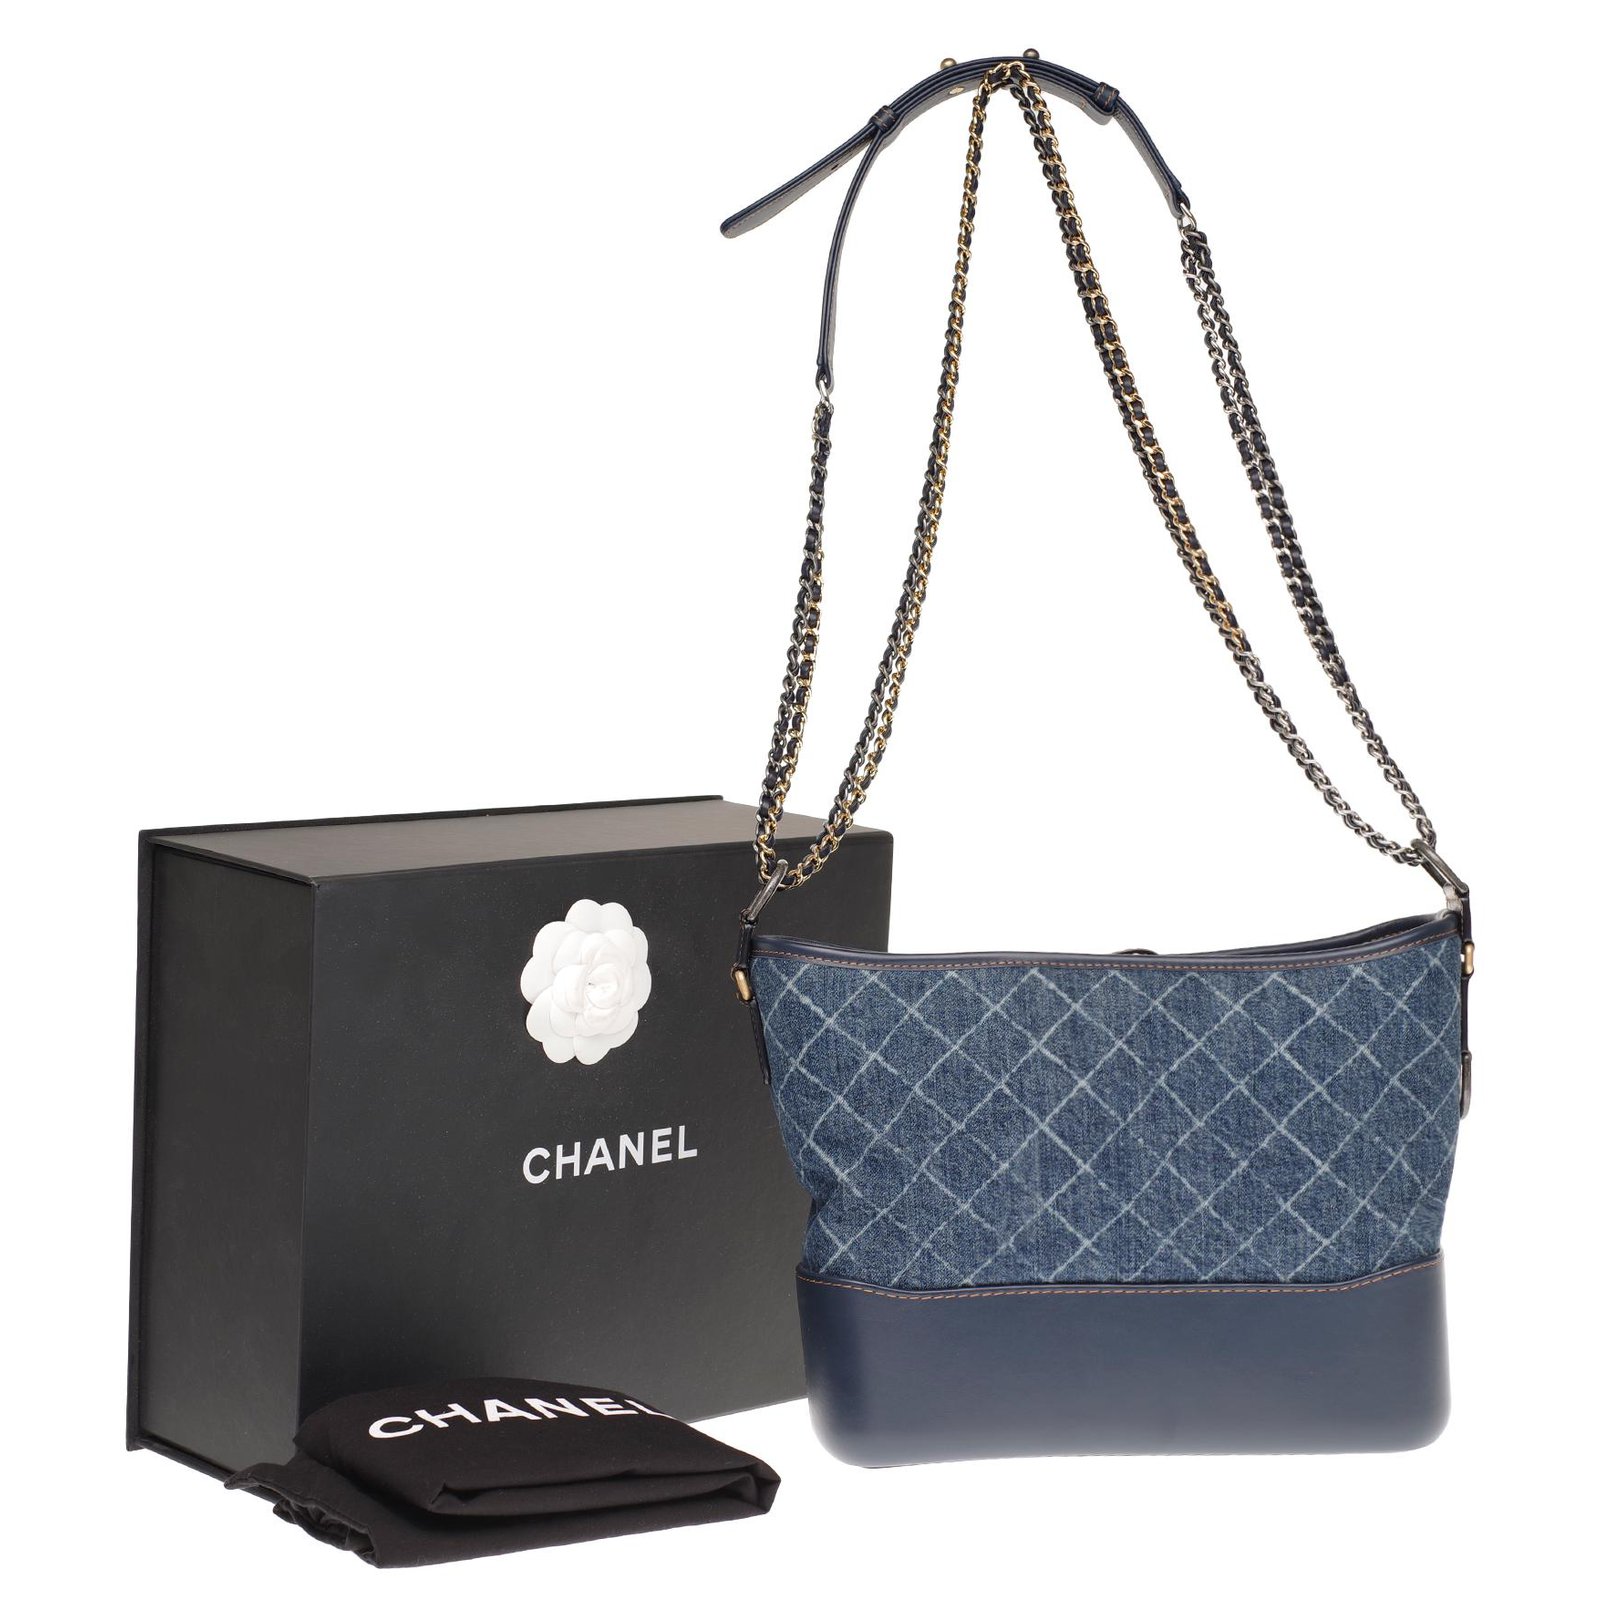 Lovely Chanel Gabrielle small model handbag in blue denim and gold